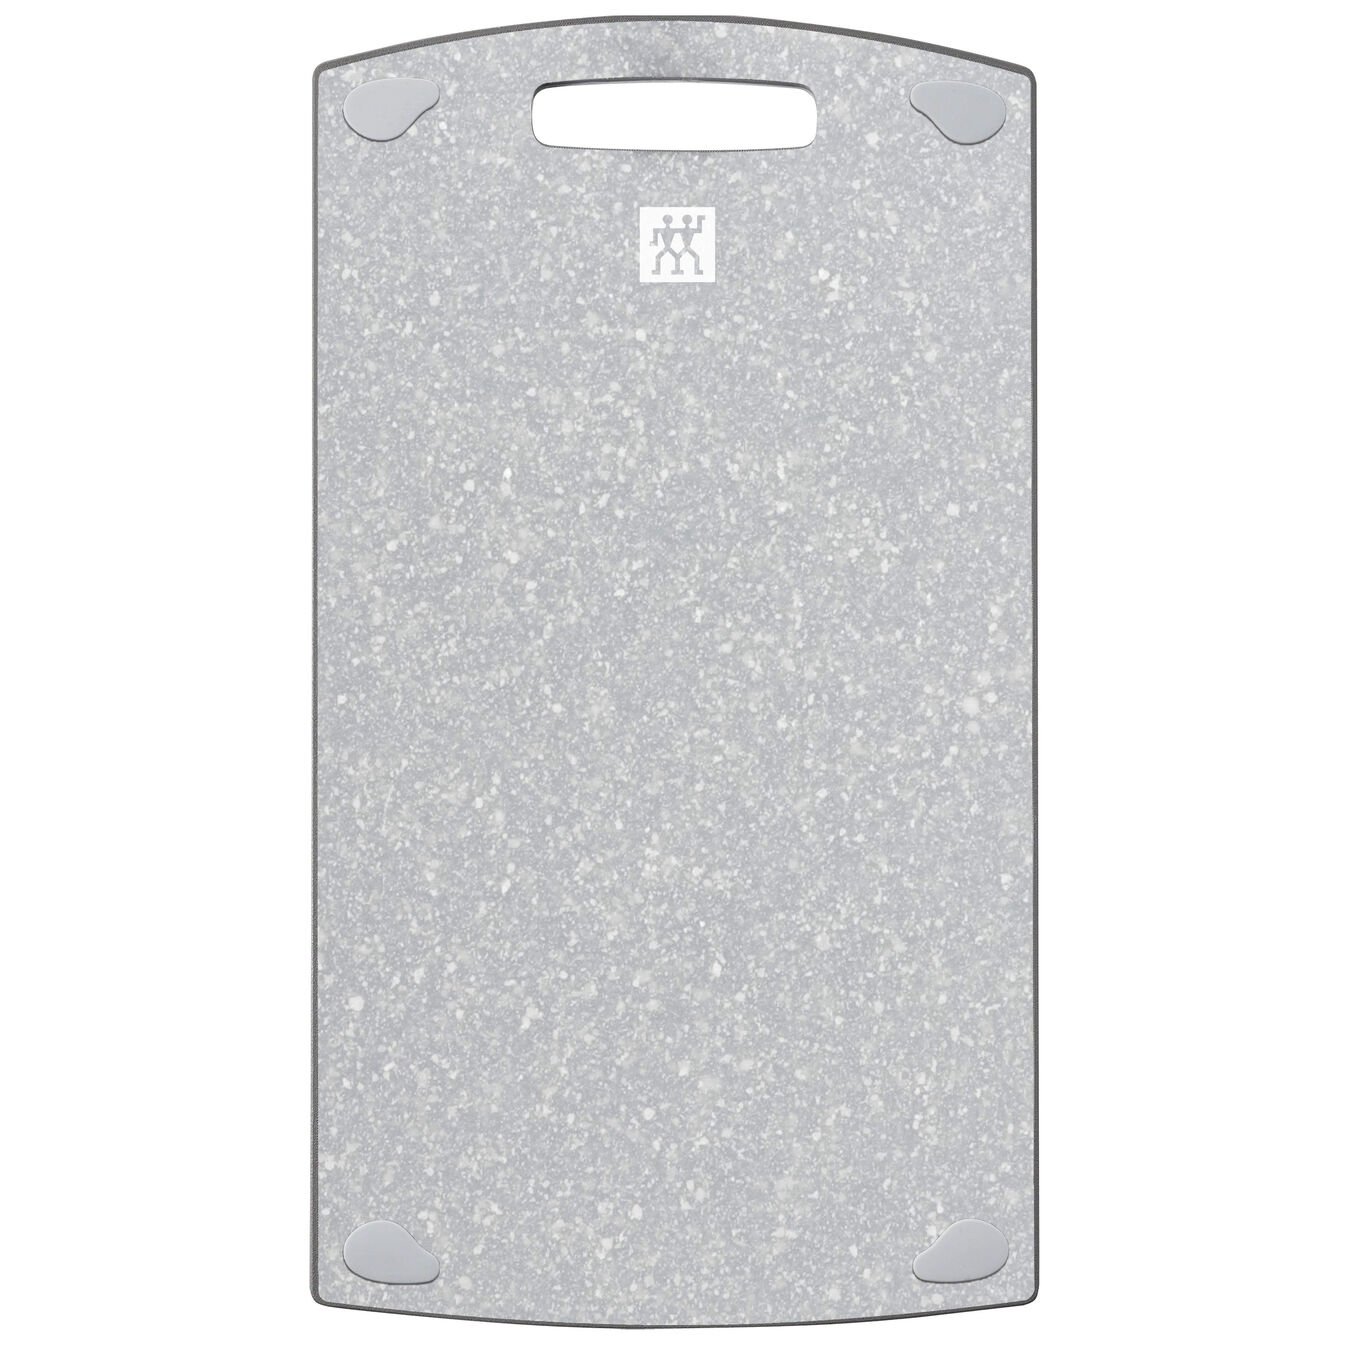 MARBLE SPECKLED BOARD SET 2 Piece, plastic,,large 7